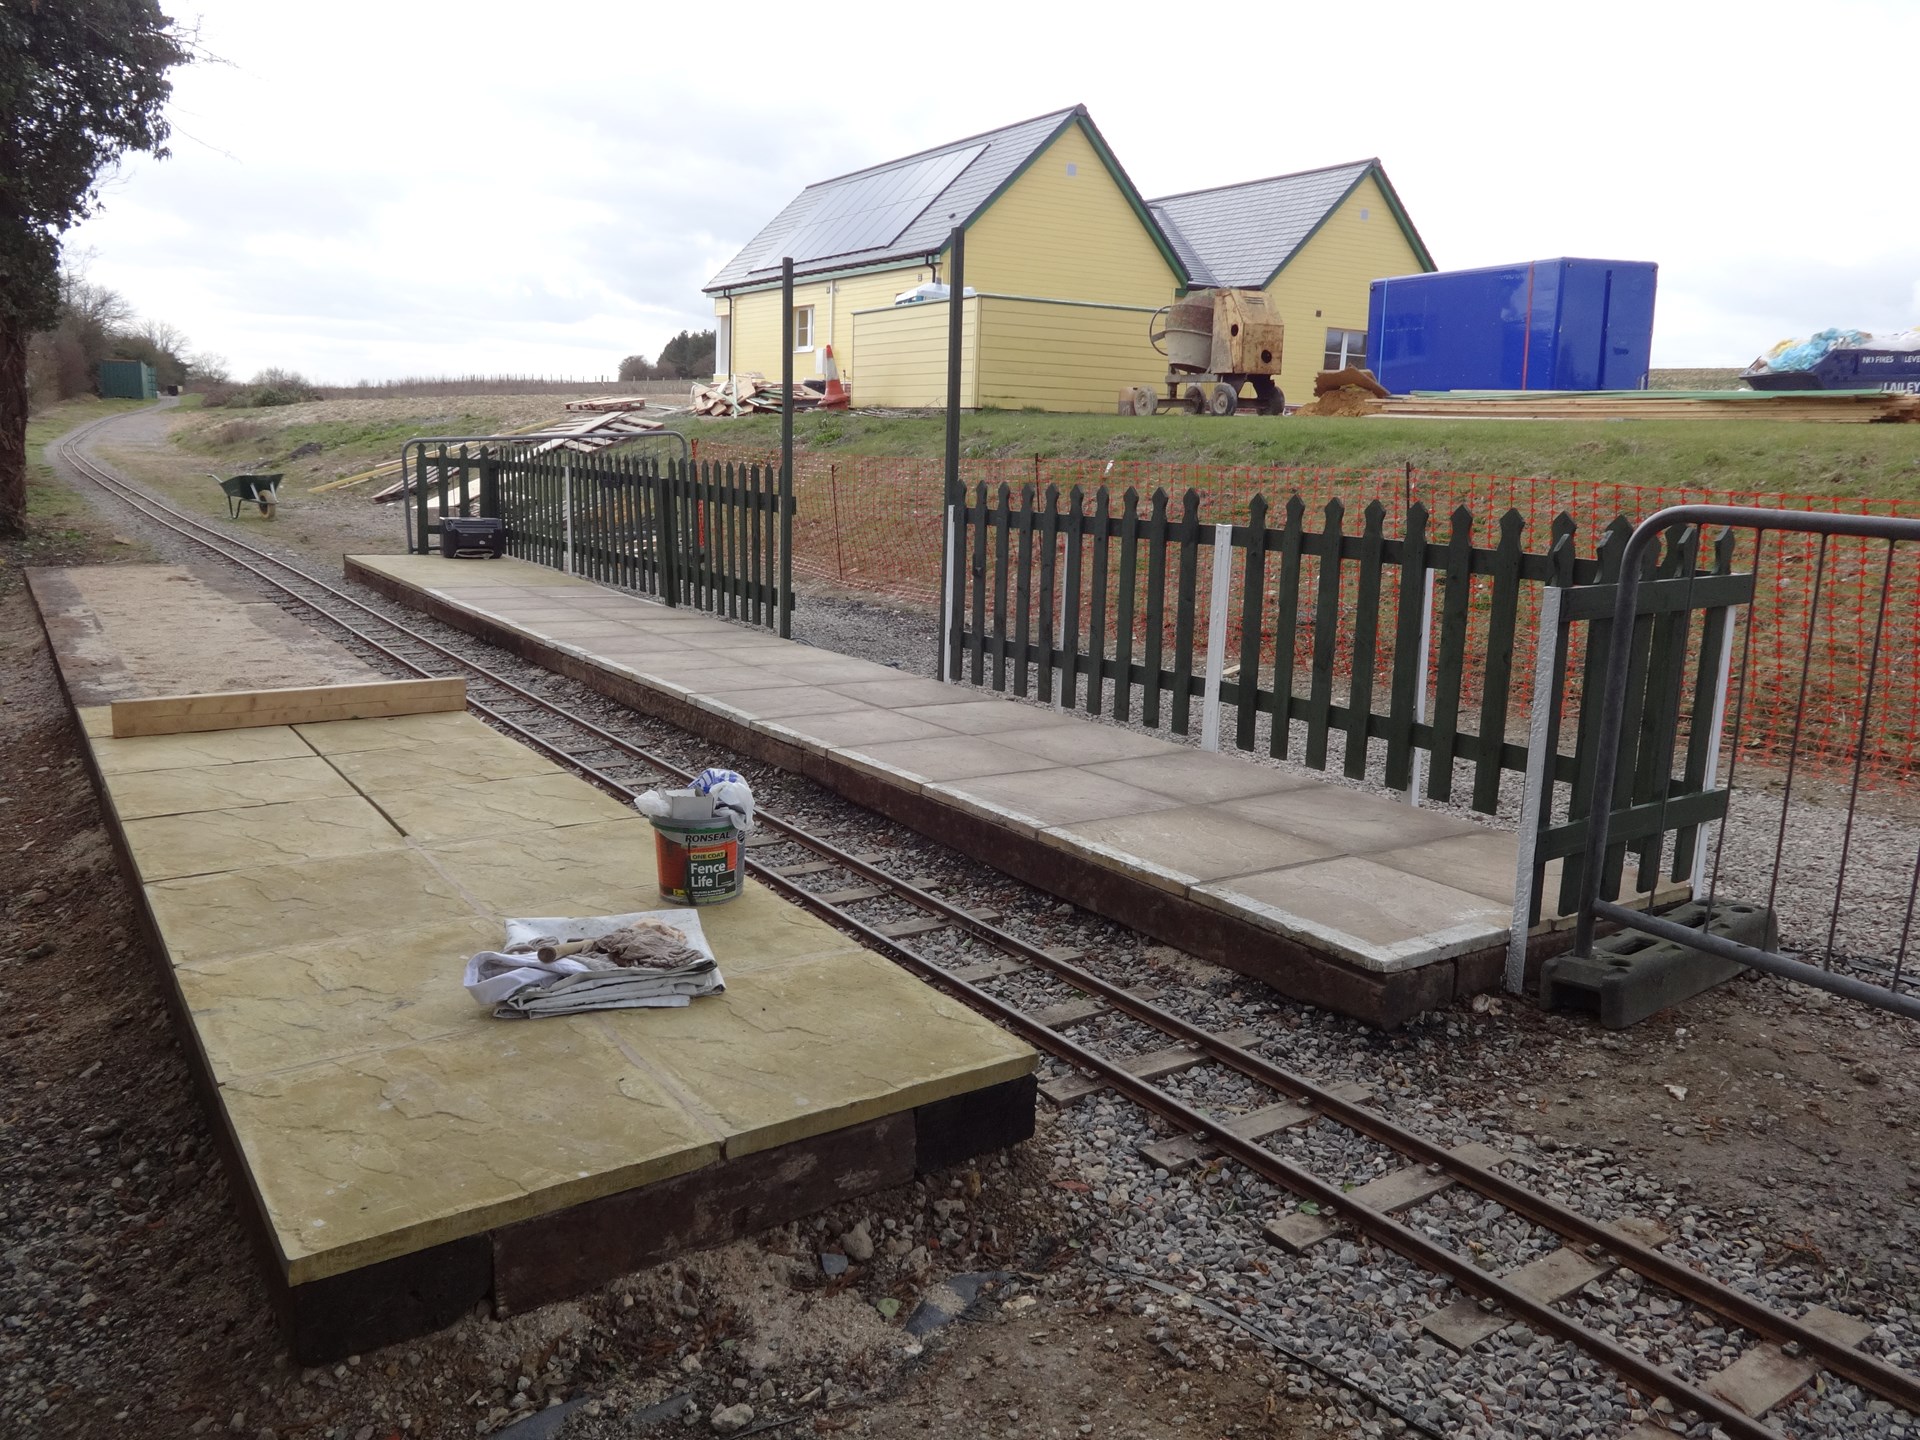 New Station, Ropley High Level, nears completion.